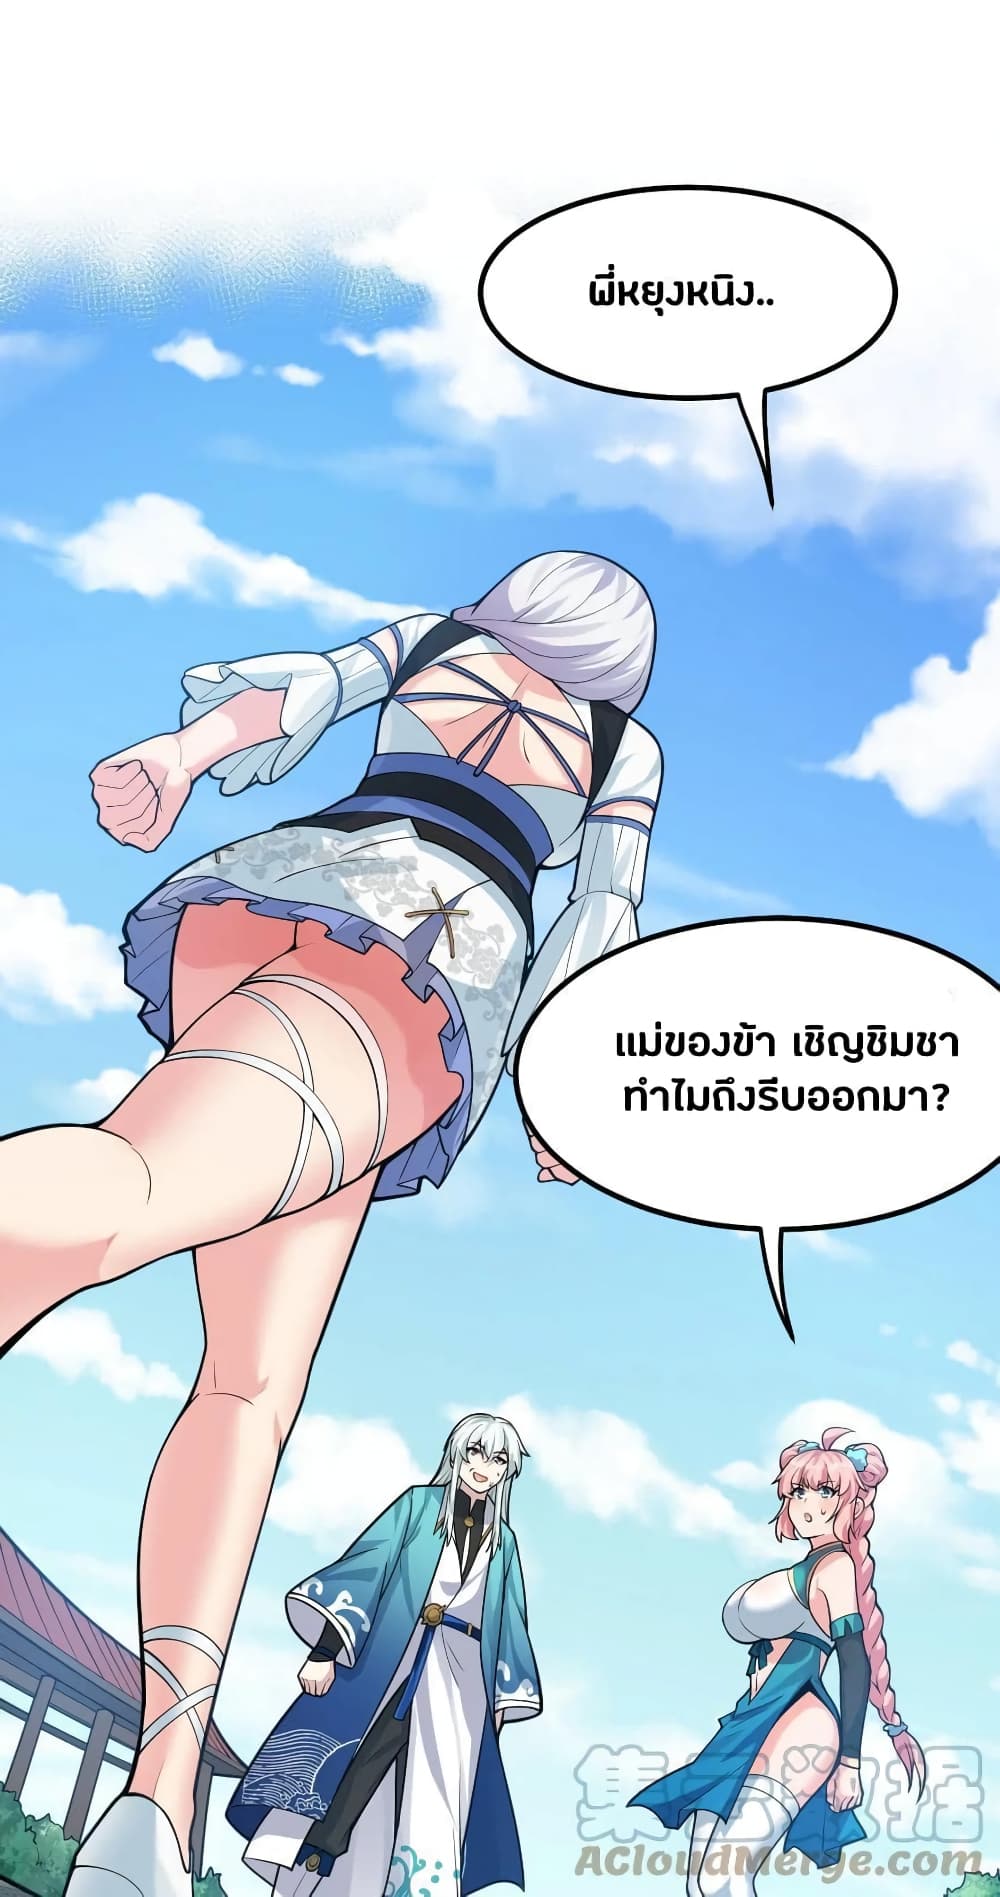 Godsian Masian from Another World ตอนที่ 126 (1)